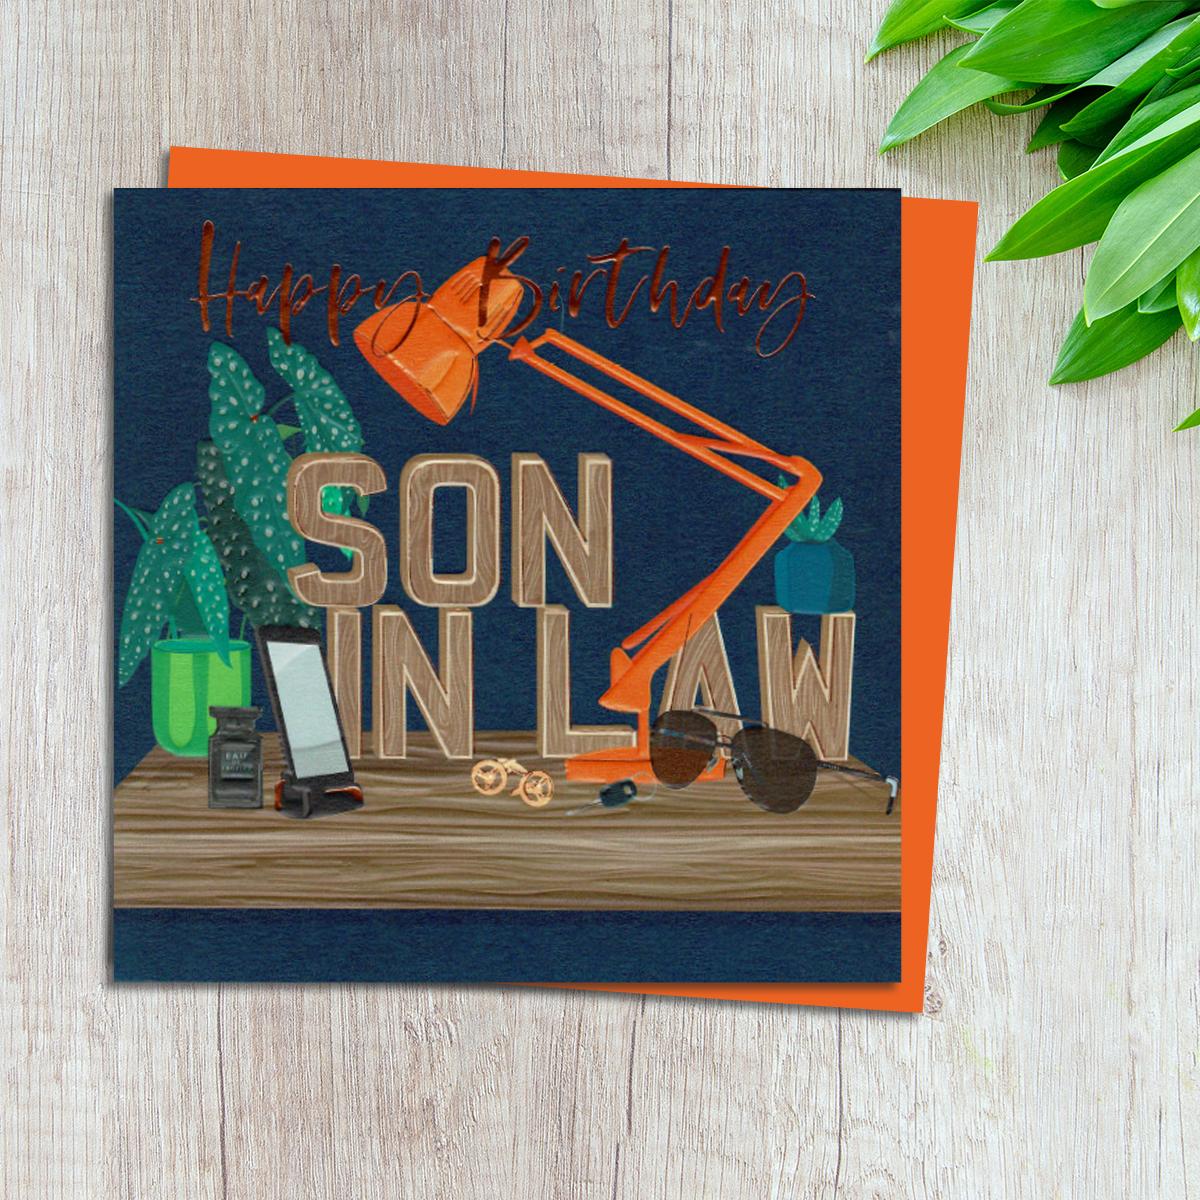 Son In Law Birthday Card design Complete With Neon Orange Envelope